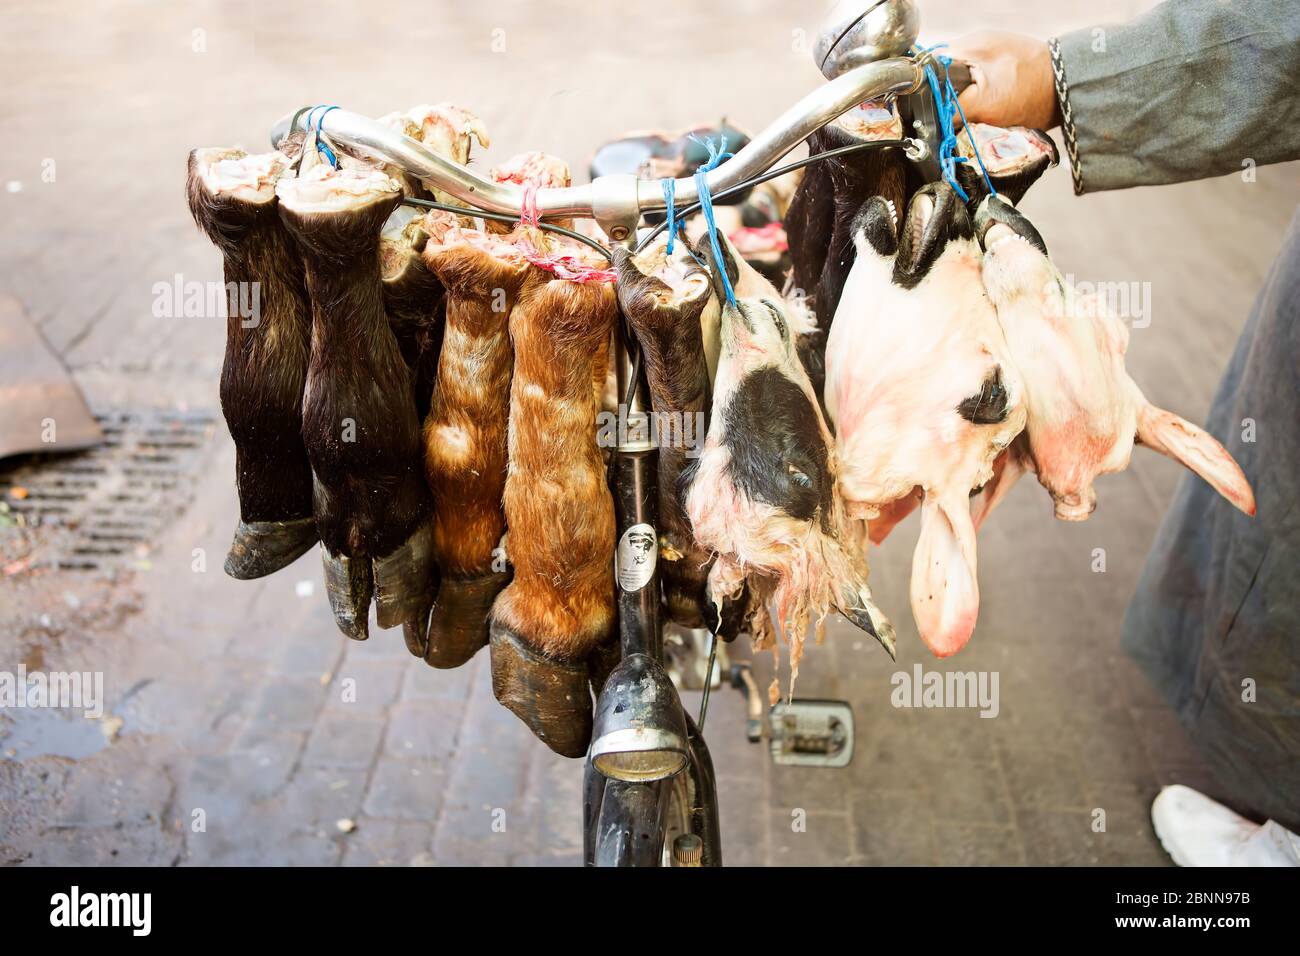 Pieces of cow meat hang on the bicycle, Morocco Stock Photo